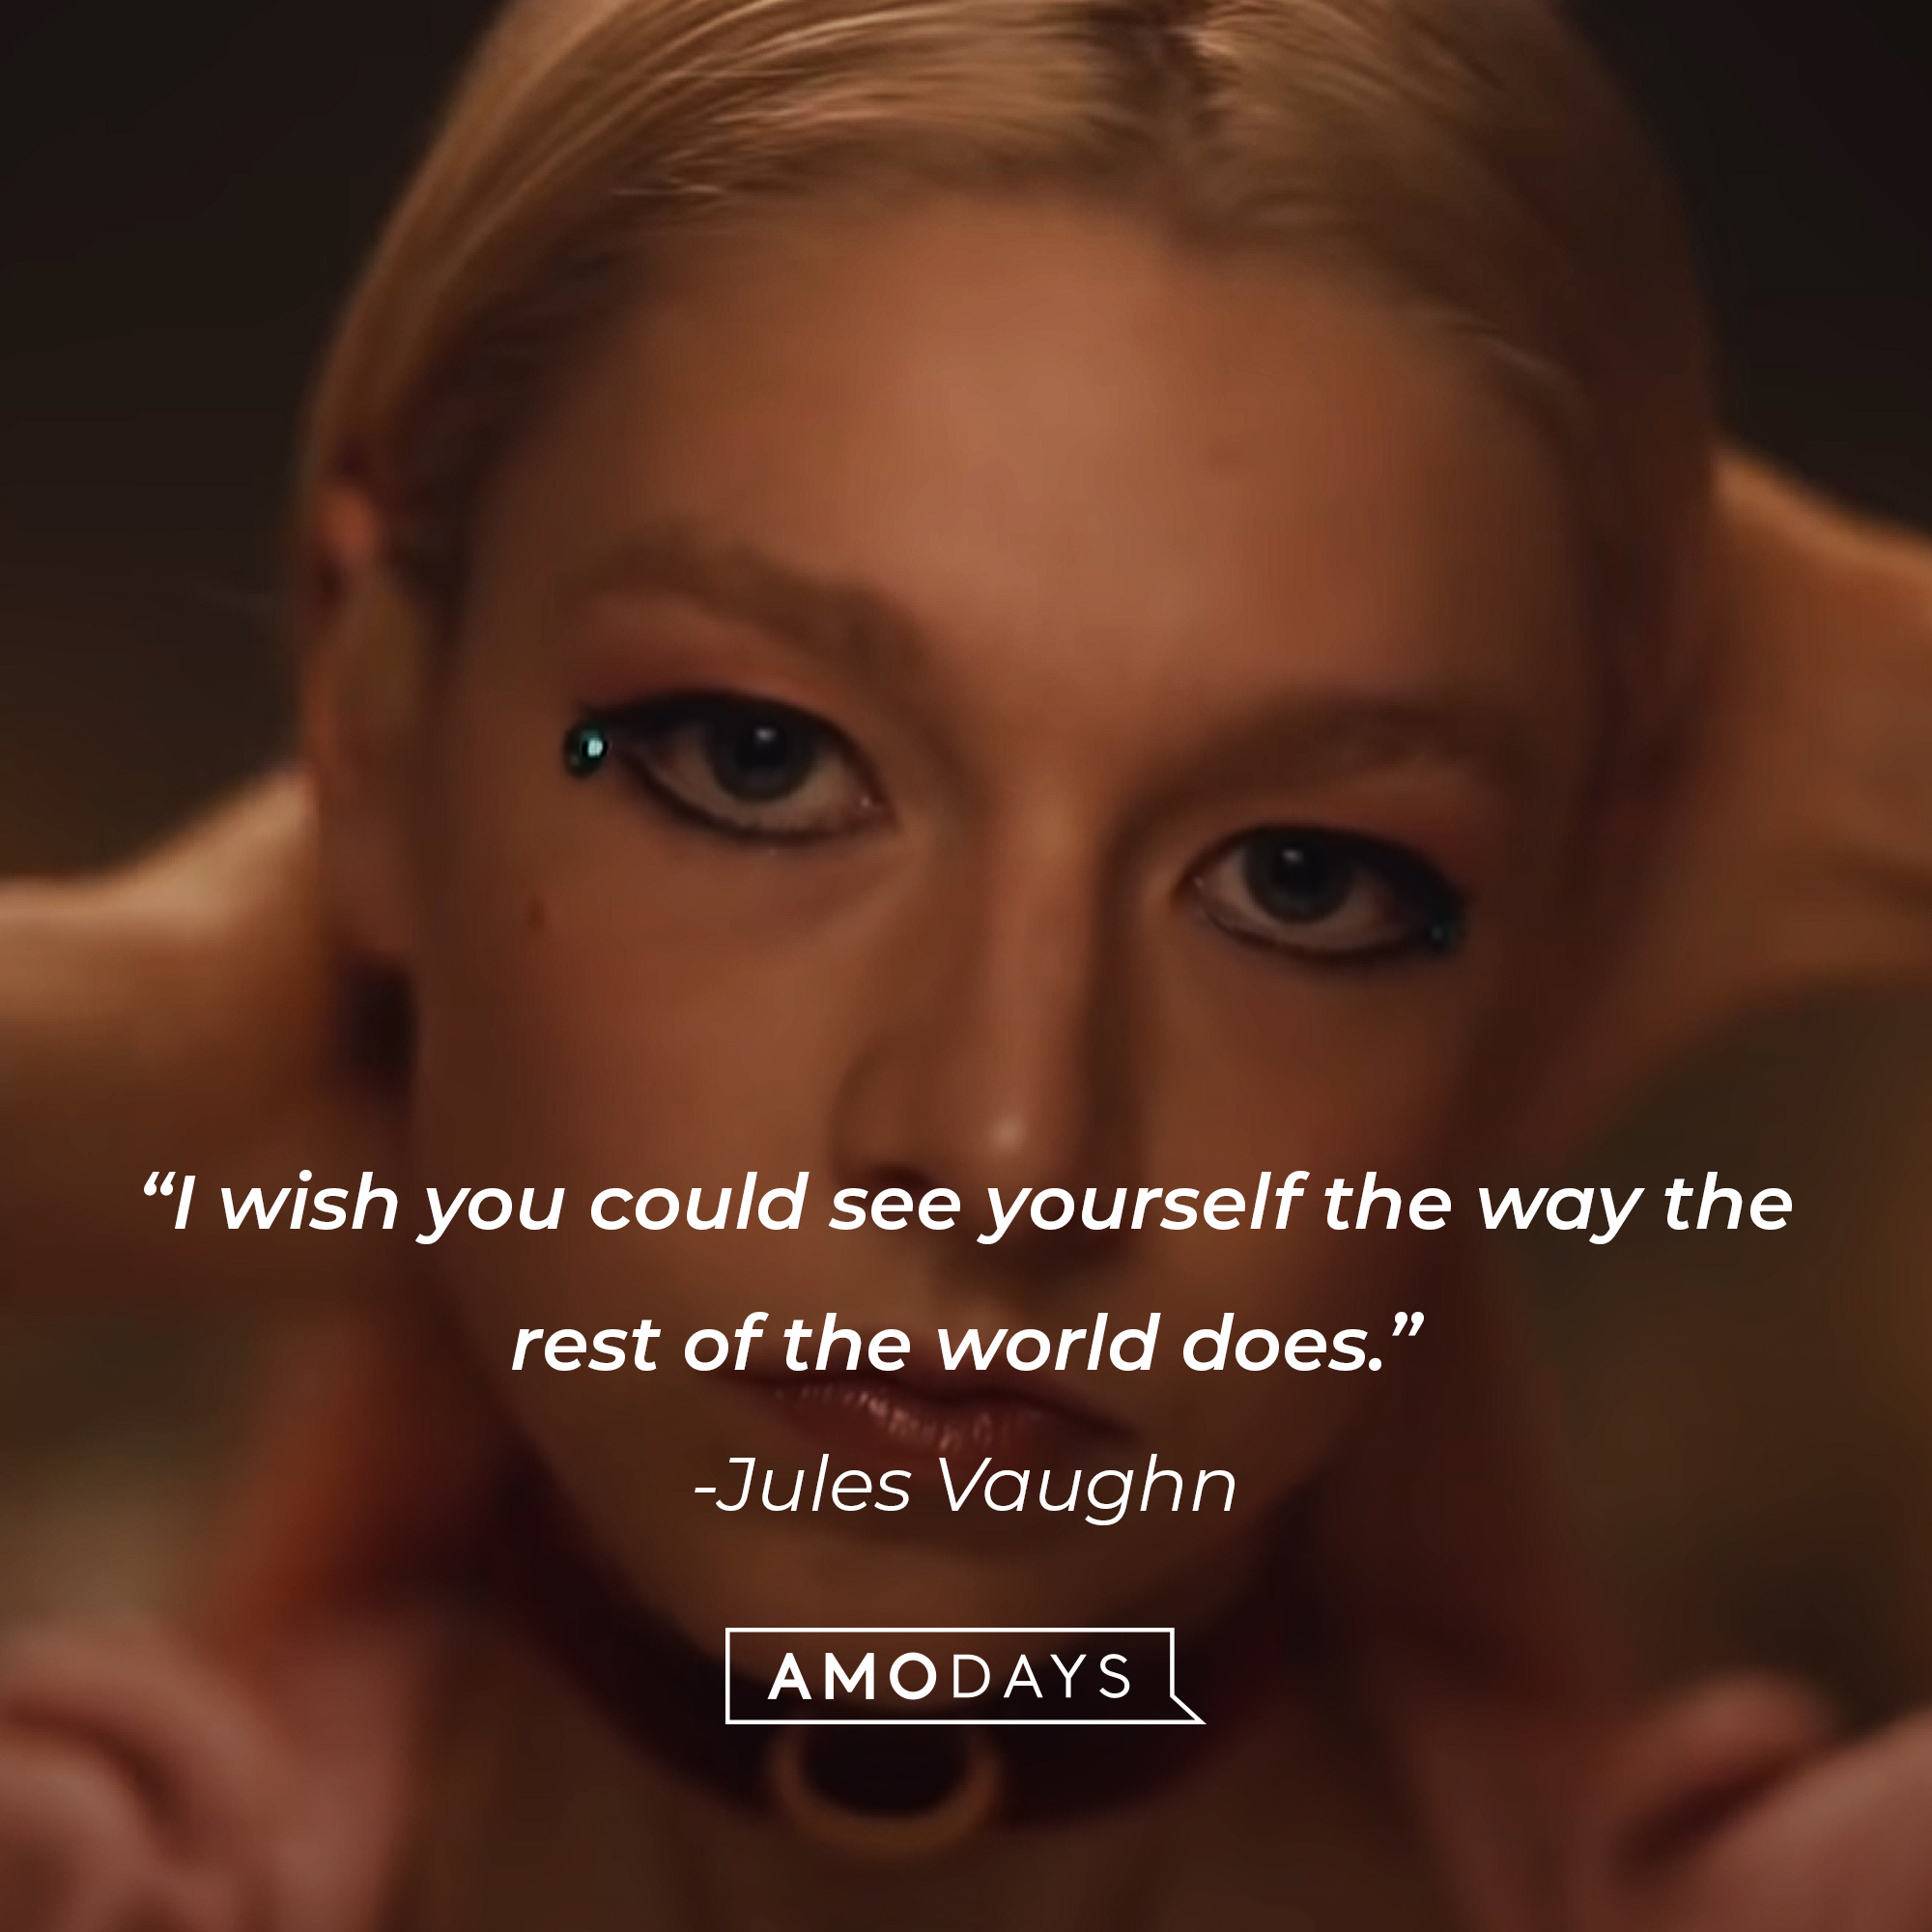 An image of Jules Vaughn, with her quote: “I wish you could see yourself the way the rest of the world does.” | Source: HBO